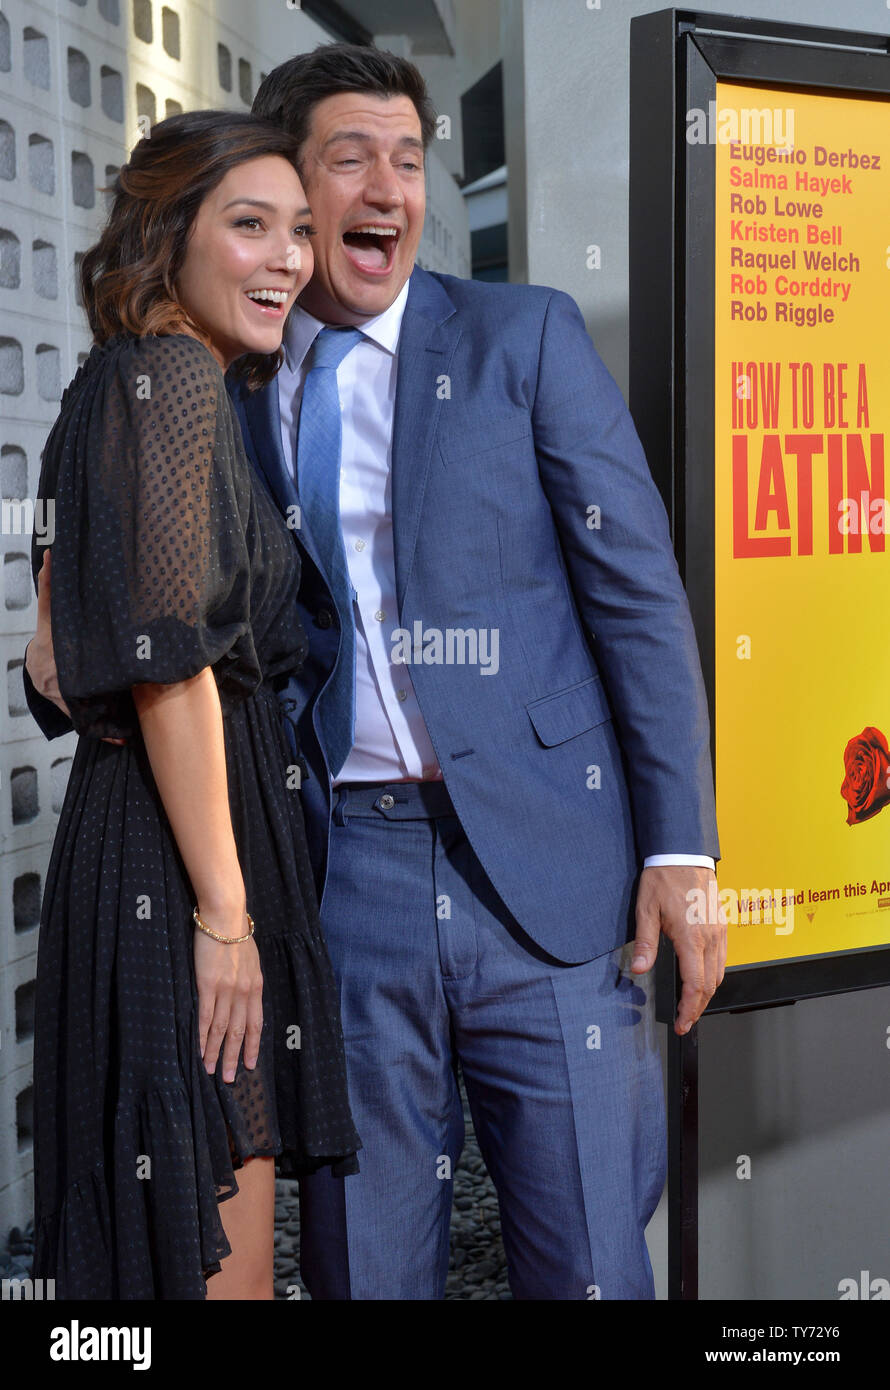 Director  Ken Marino and Erica Oyama attend the premiere of his new motion picture comedy 'How to Be a Latin Lover' at the ArcLight Cinerama Dome in the Hollywood section of Los Angeles. Storyline: Finding himself dumped after 25 years of marriage, a man who made a career of seducing rich older women must move in with his estranged sister, where he begins to learn the value of family.  Photo by Jim Ruymen/UPI Stock Photo